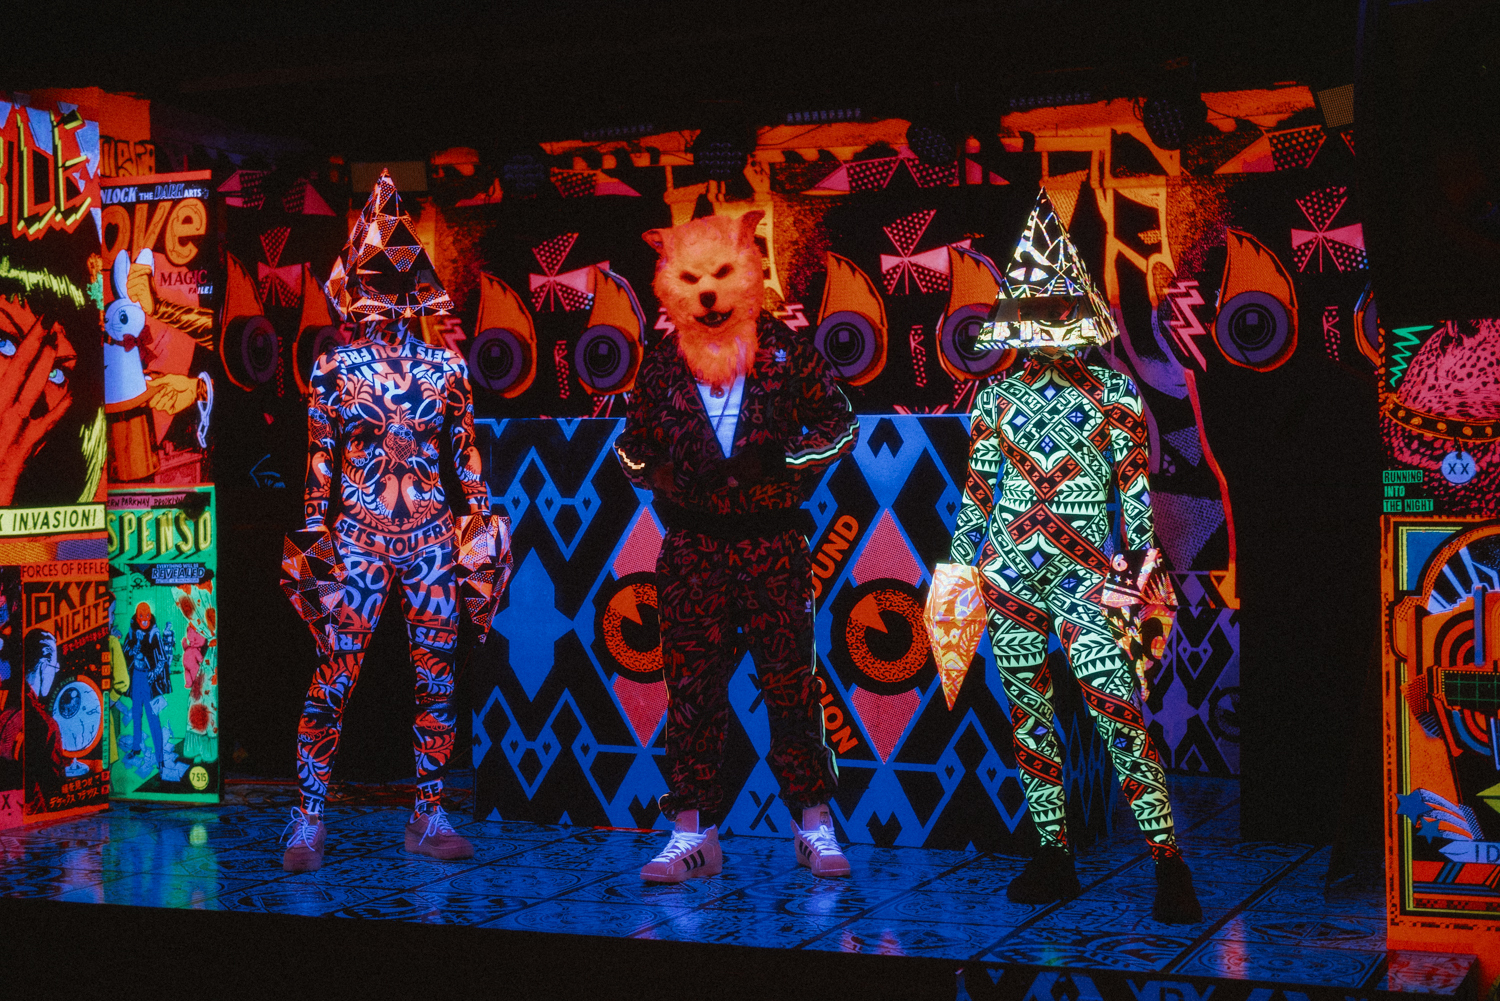 A video projection showing three people, one wearing a cat mask.